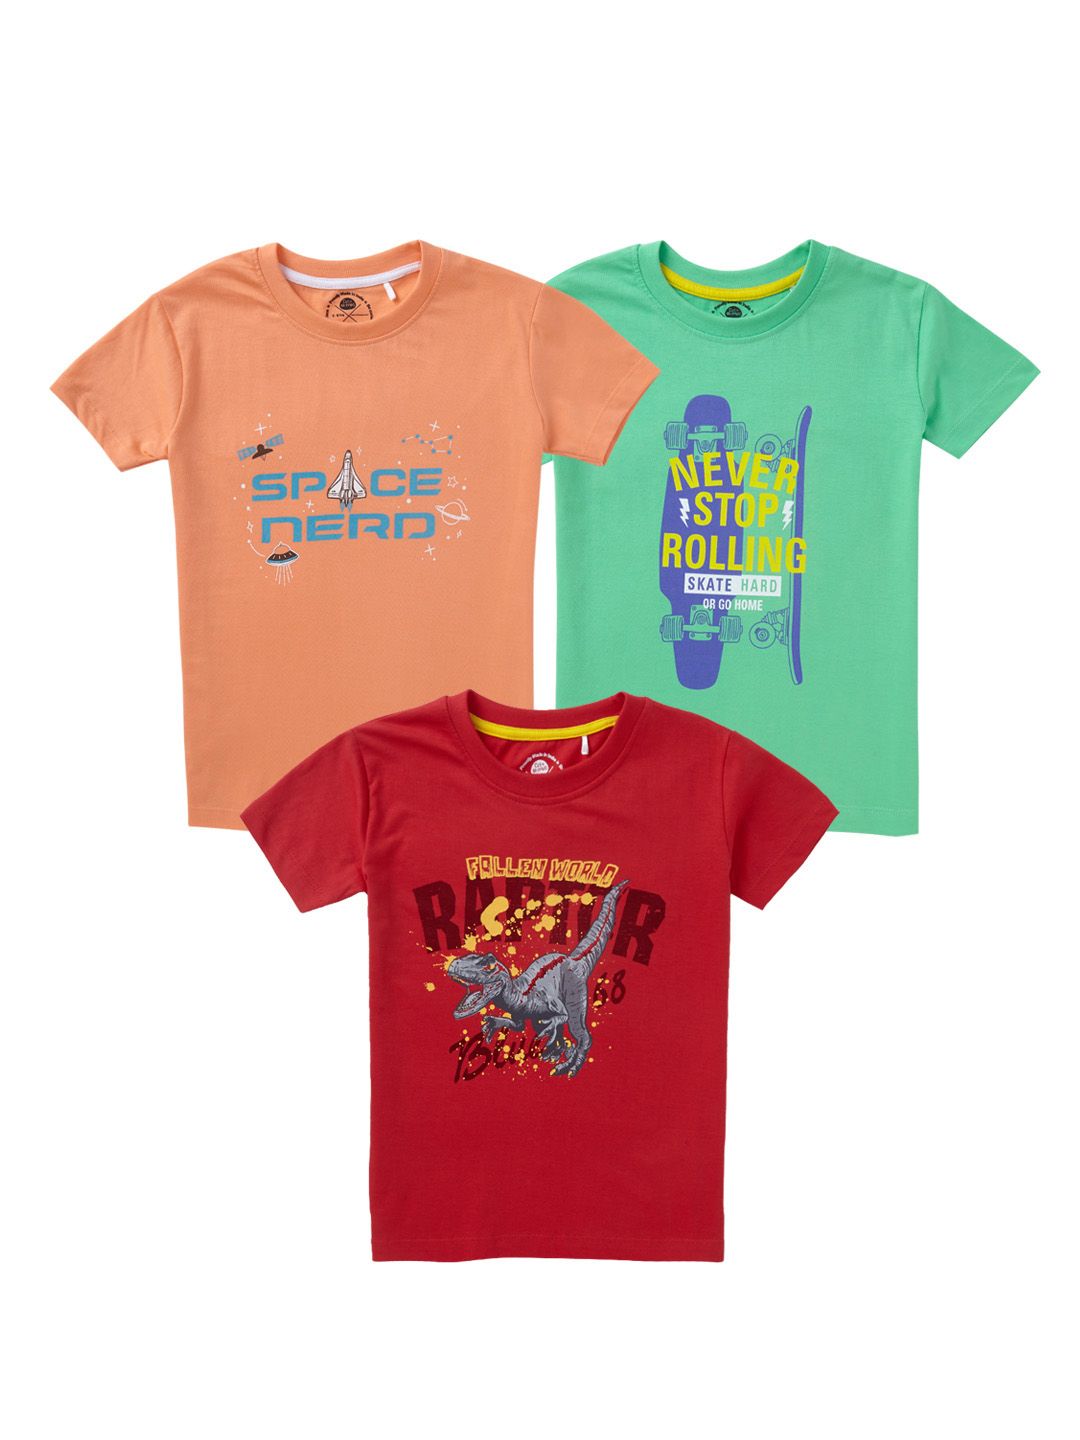 Boys pack of 3 t-shirts